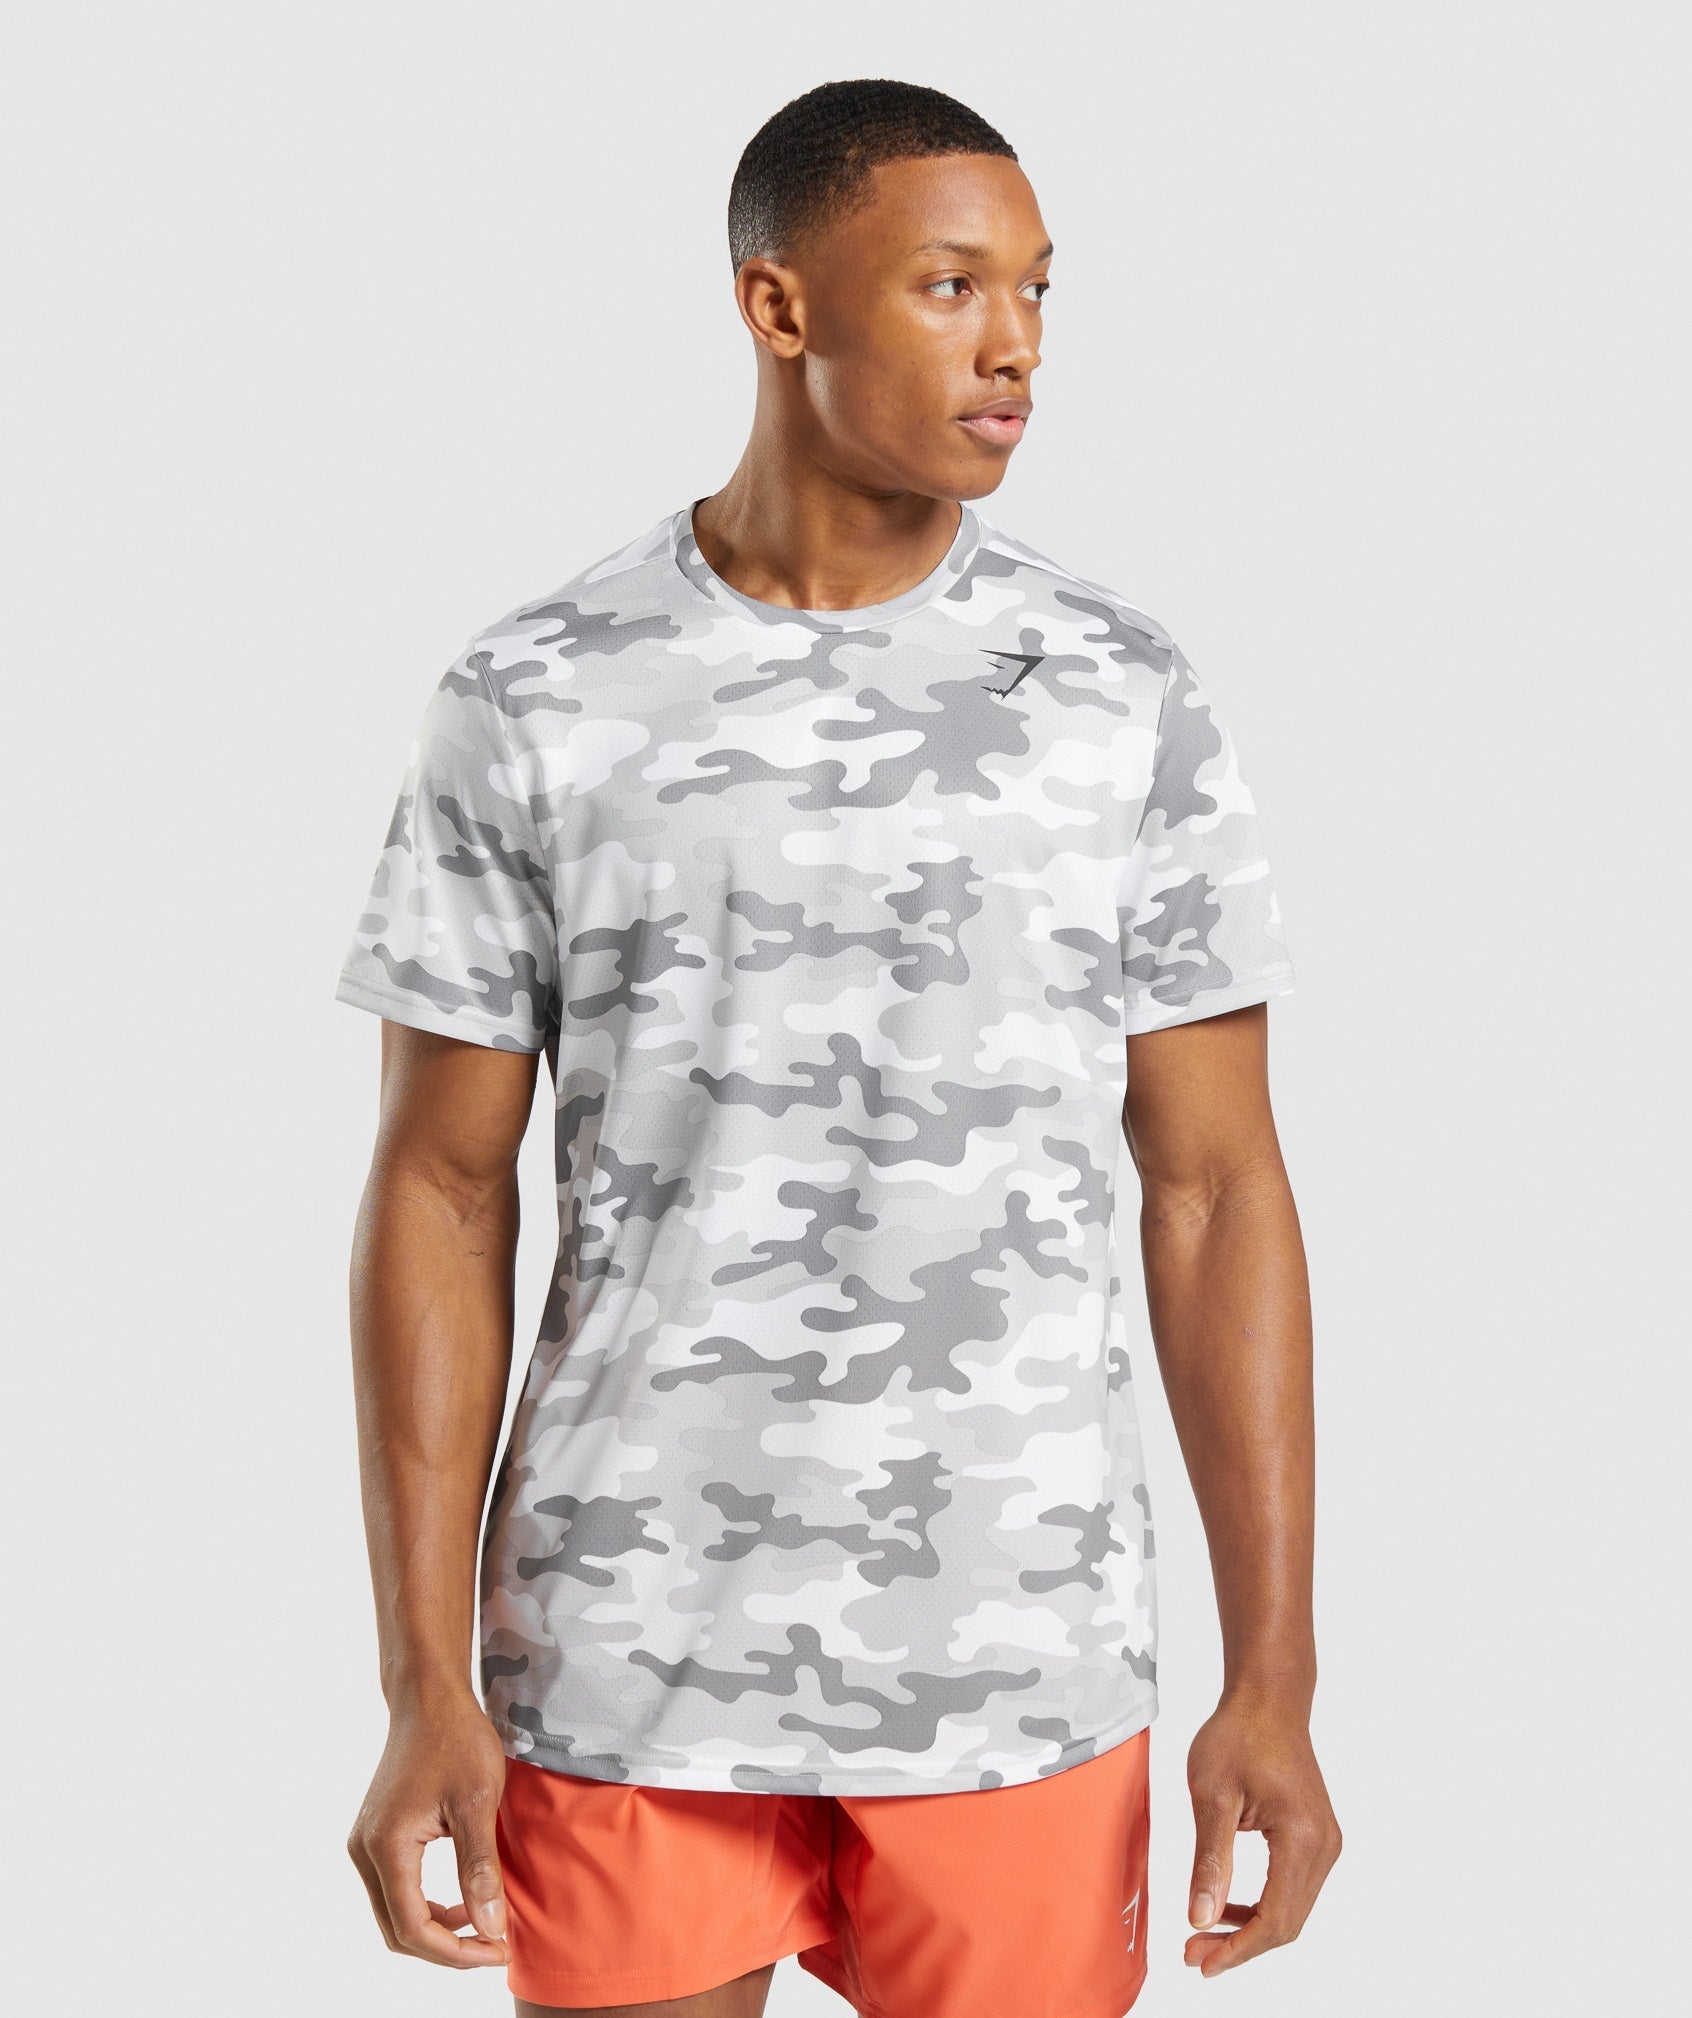 Arrival T-Shirt in Light Grey Print